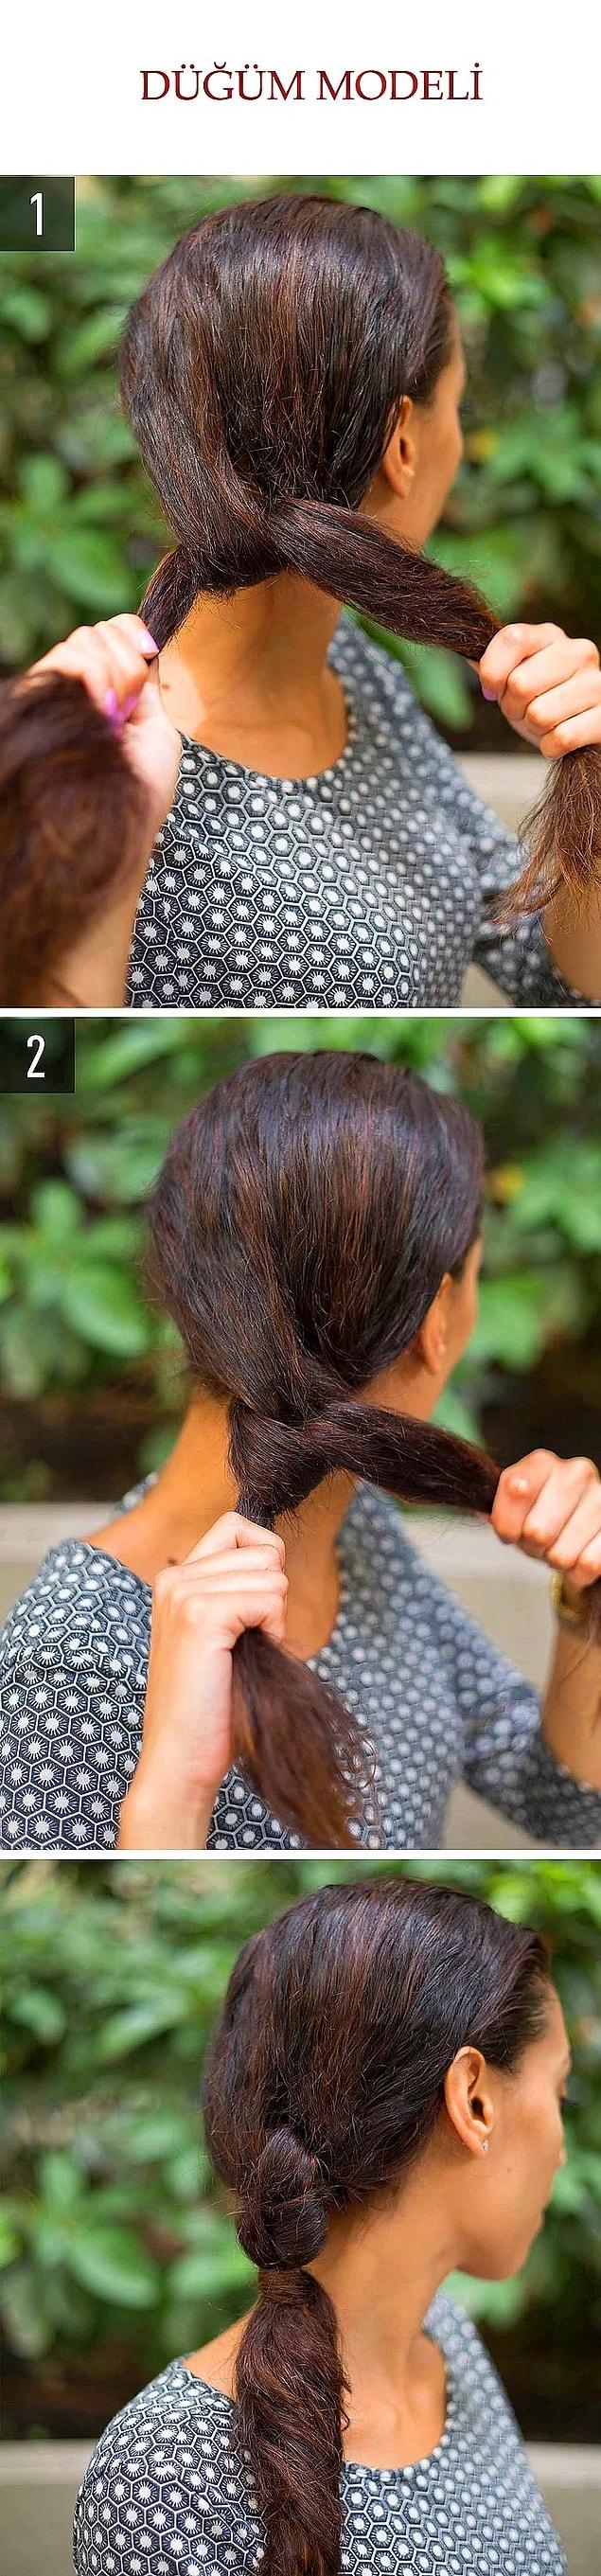 17. Knot your hair twice and secure it with a lock of hair.